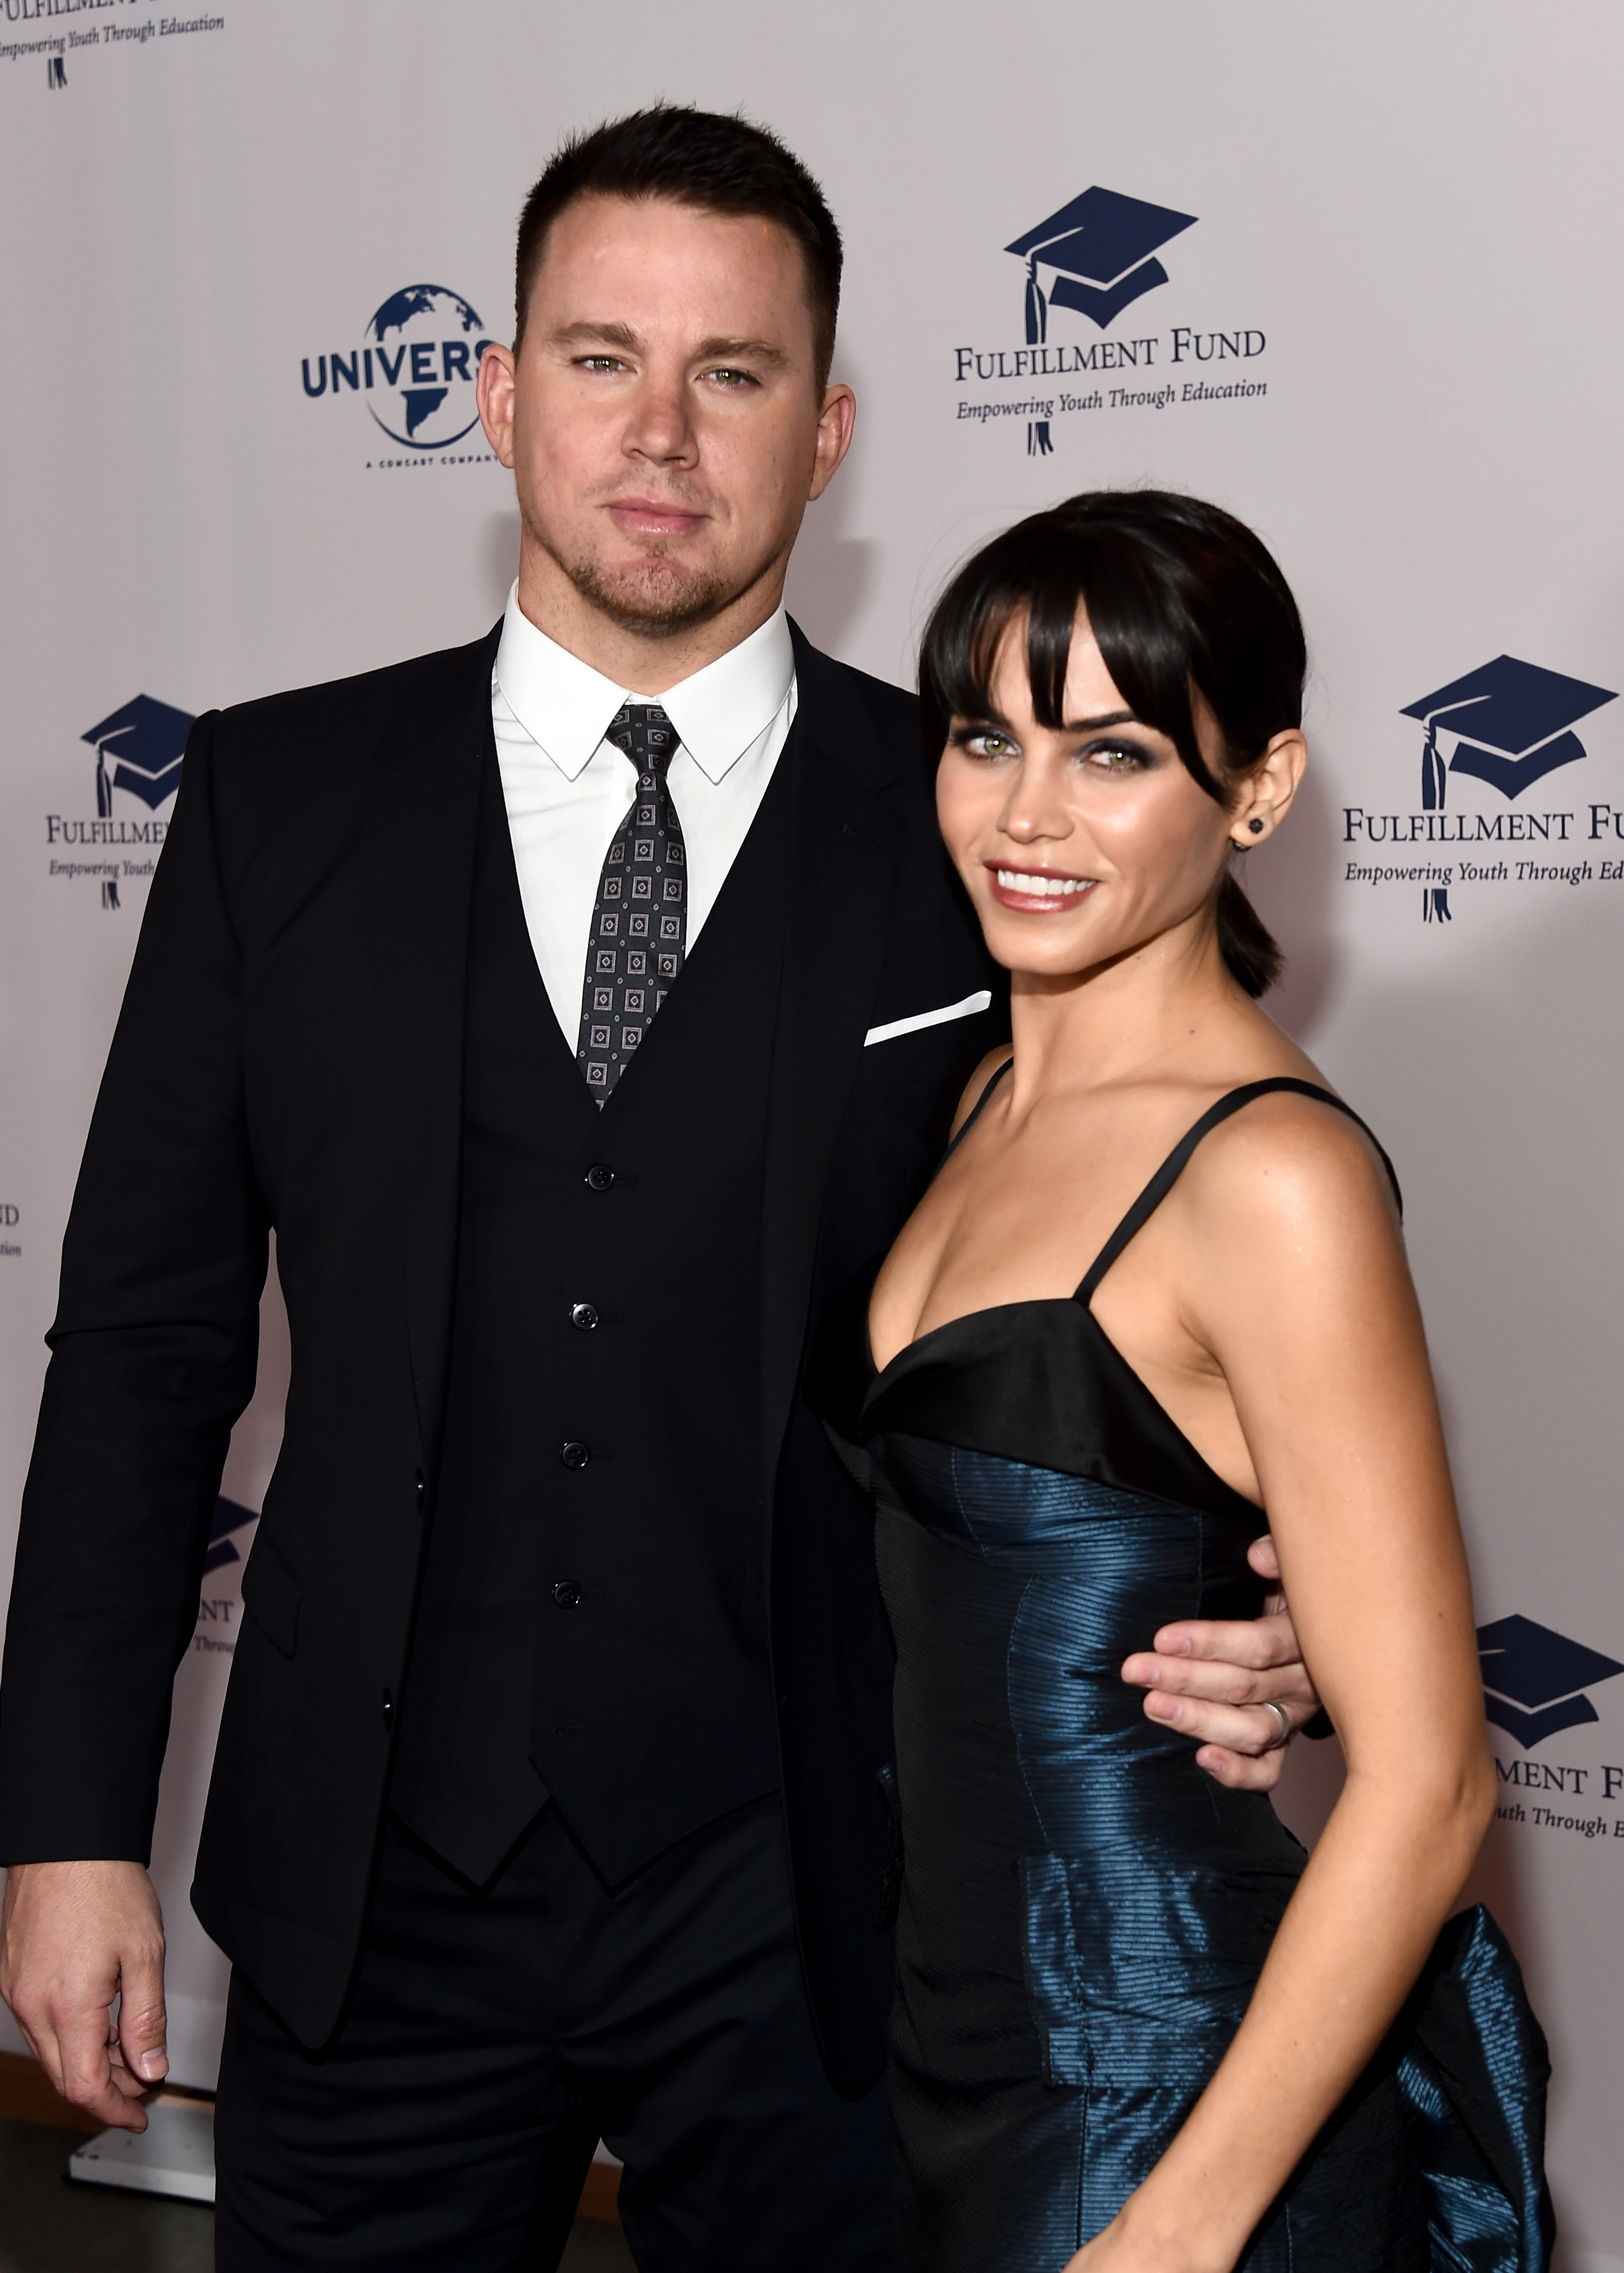 Channing Tatum in a black suit standing beside Jenna Dewan in a strapless dress on the red carpet